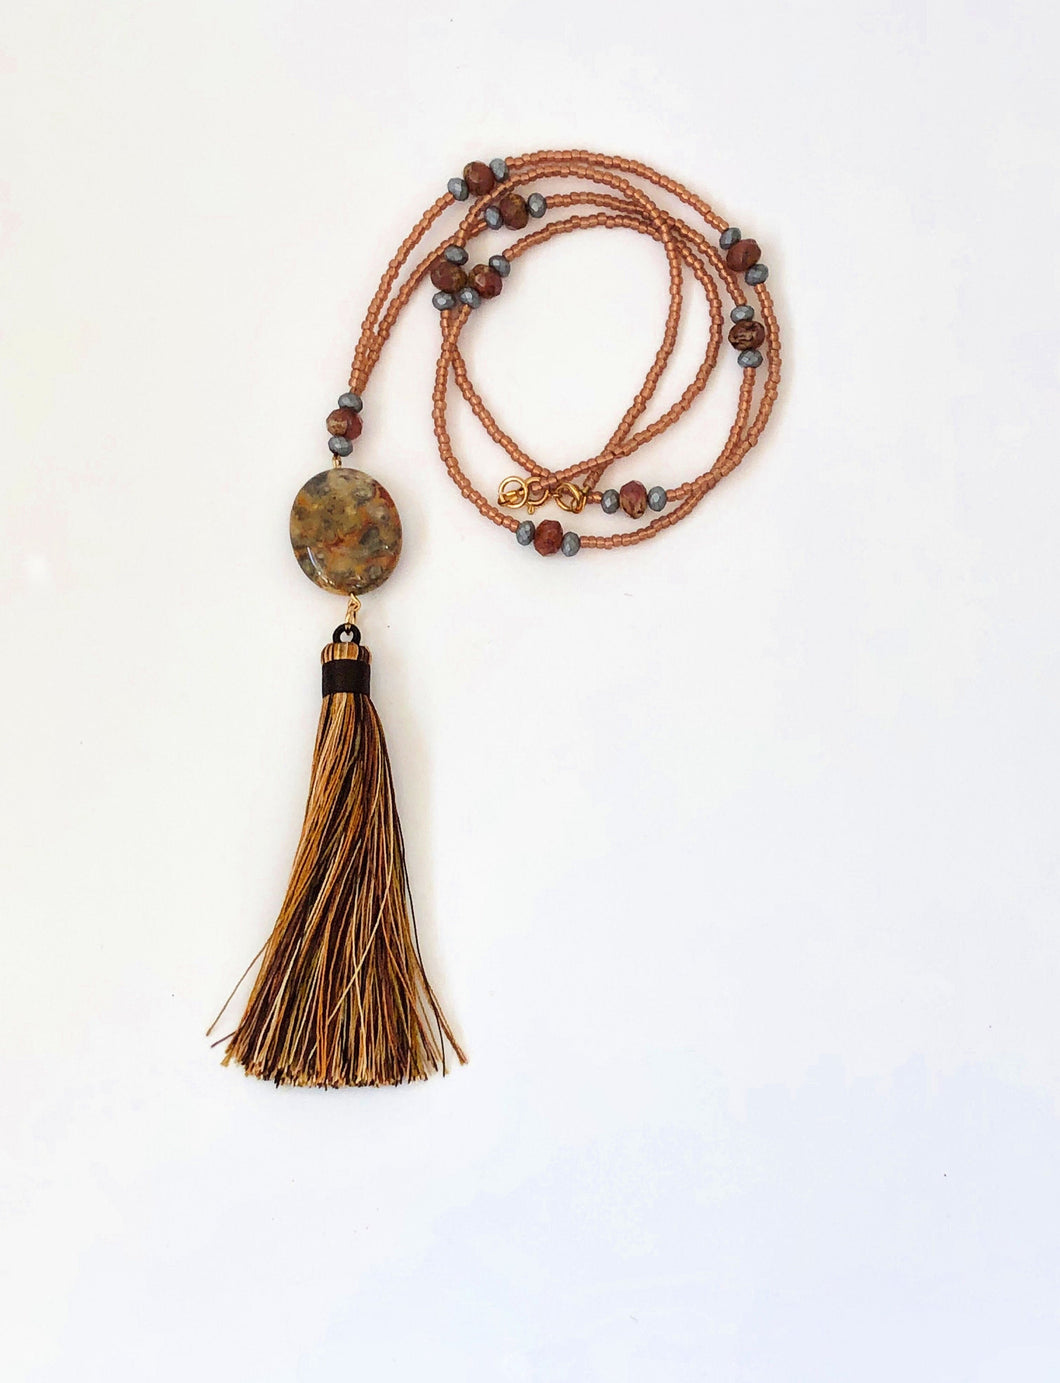 Gold Agate Gemstone Necklace With Tassel